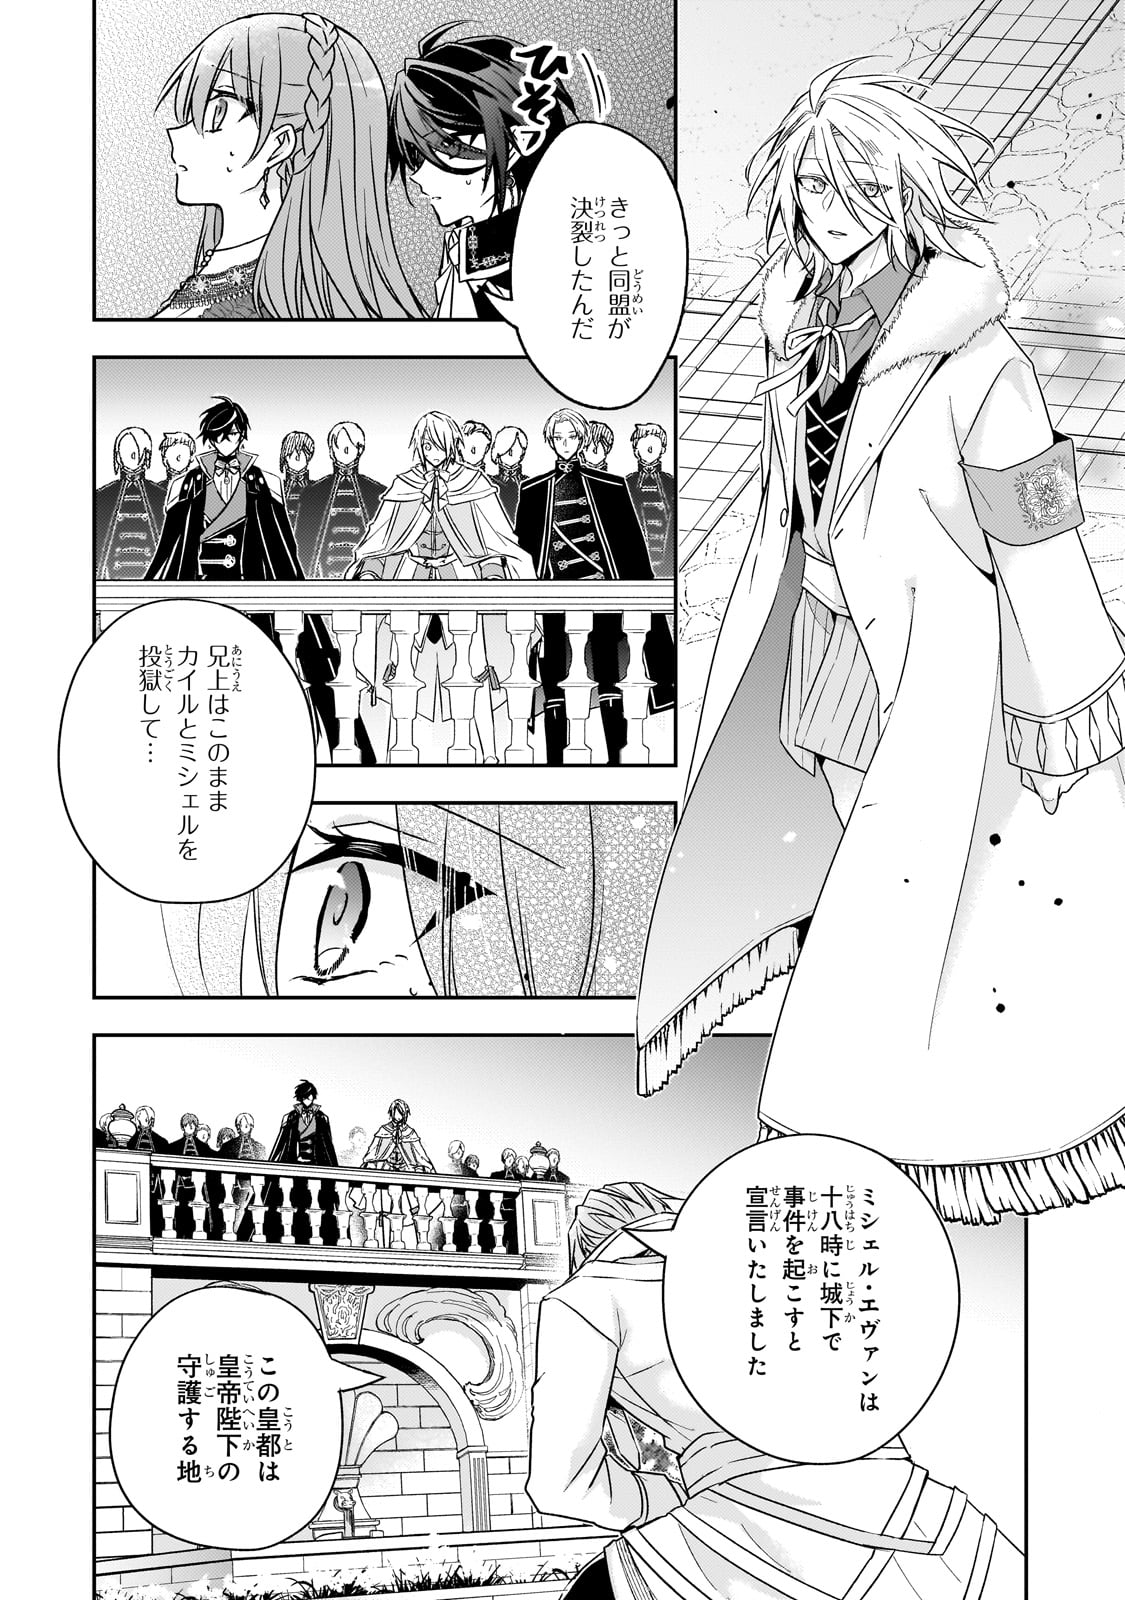 The Villainess Wants to Enjoy a Carefree Married Life in a Former Enemy Country in Her Seventh Loop! - Chapter 30 - Page 4